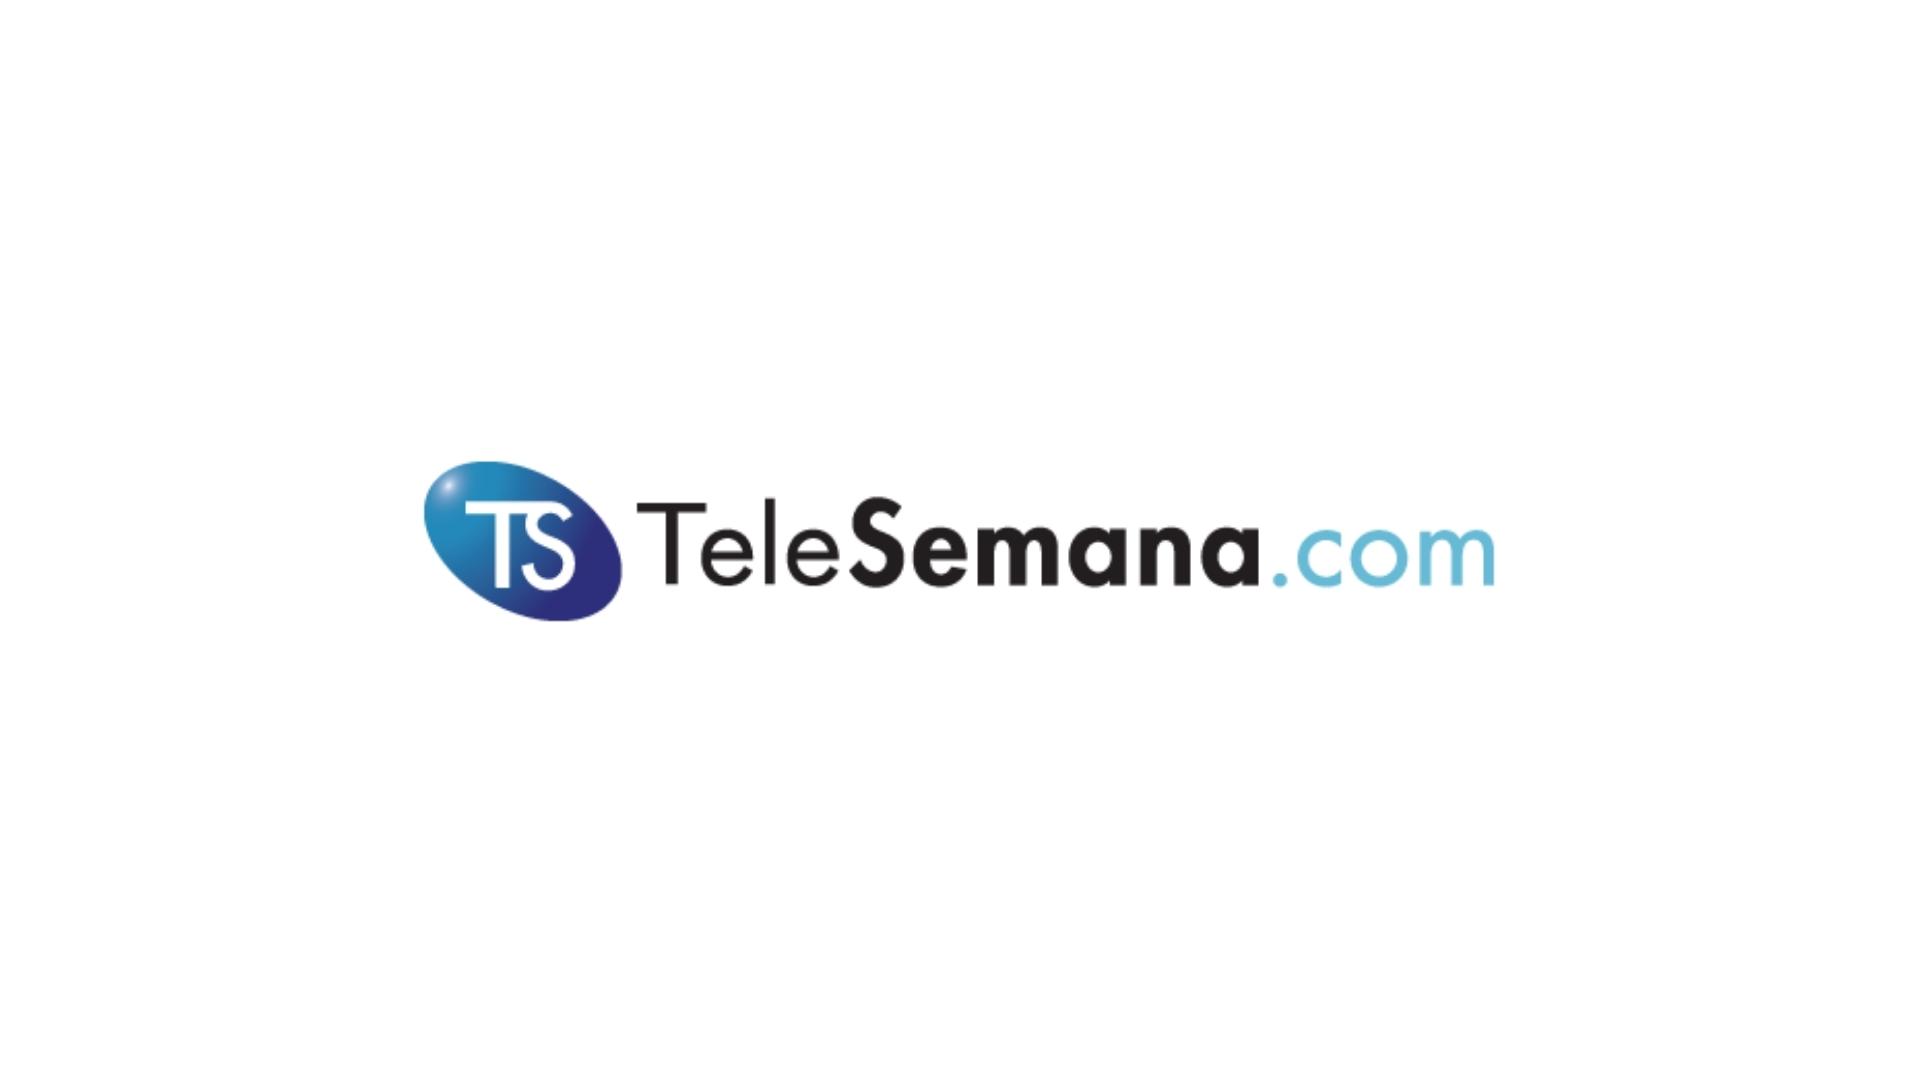 Telesemana: The prospects for regional satellite business and innovation